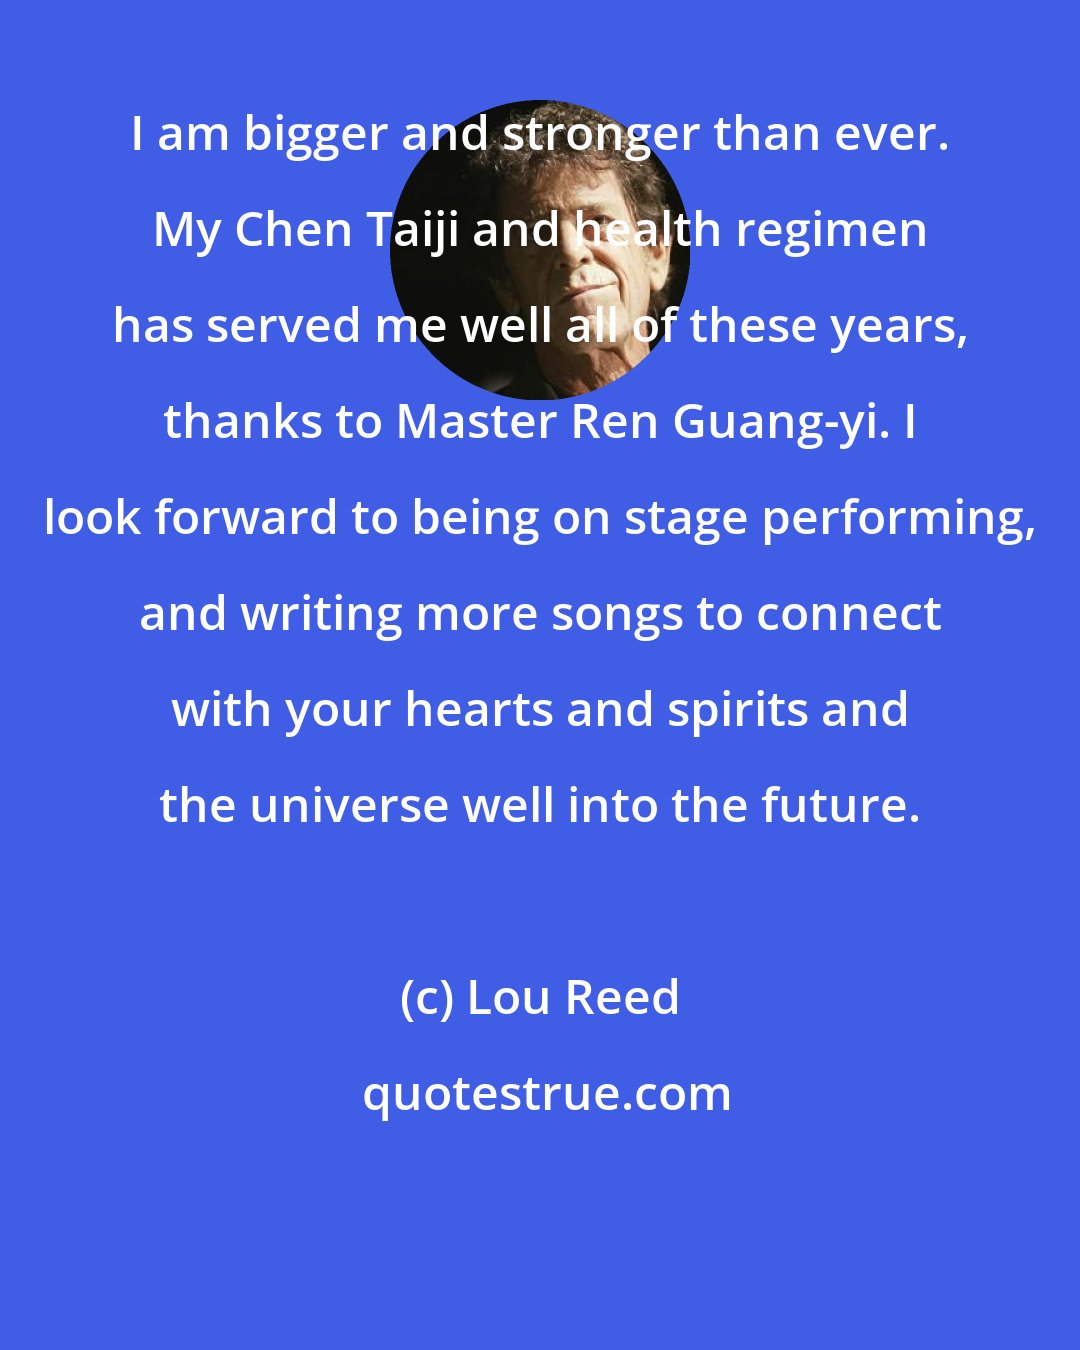 Lou Reed: I am bigger and stronger than ever. My Chen Taiji and health regimen has served me well all of these years, thanks to Master Ren Guang-yi. I look forward to being on stage performing, and writing more songs to connect with your hearts and spirits and the universe well into the future.